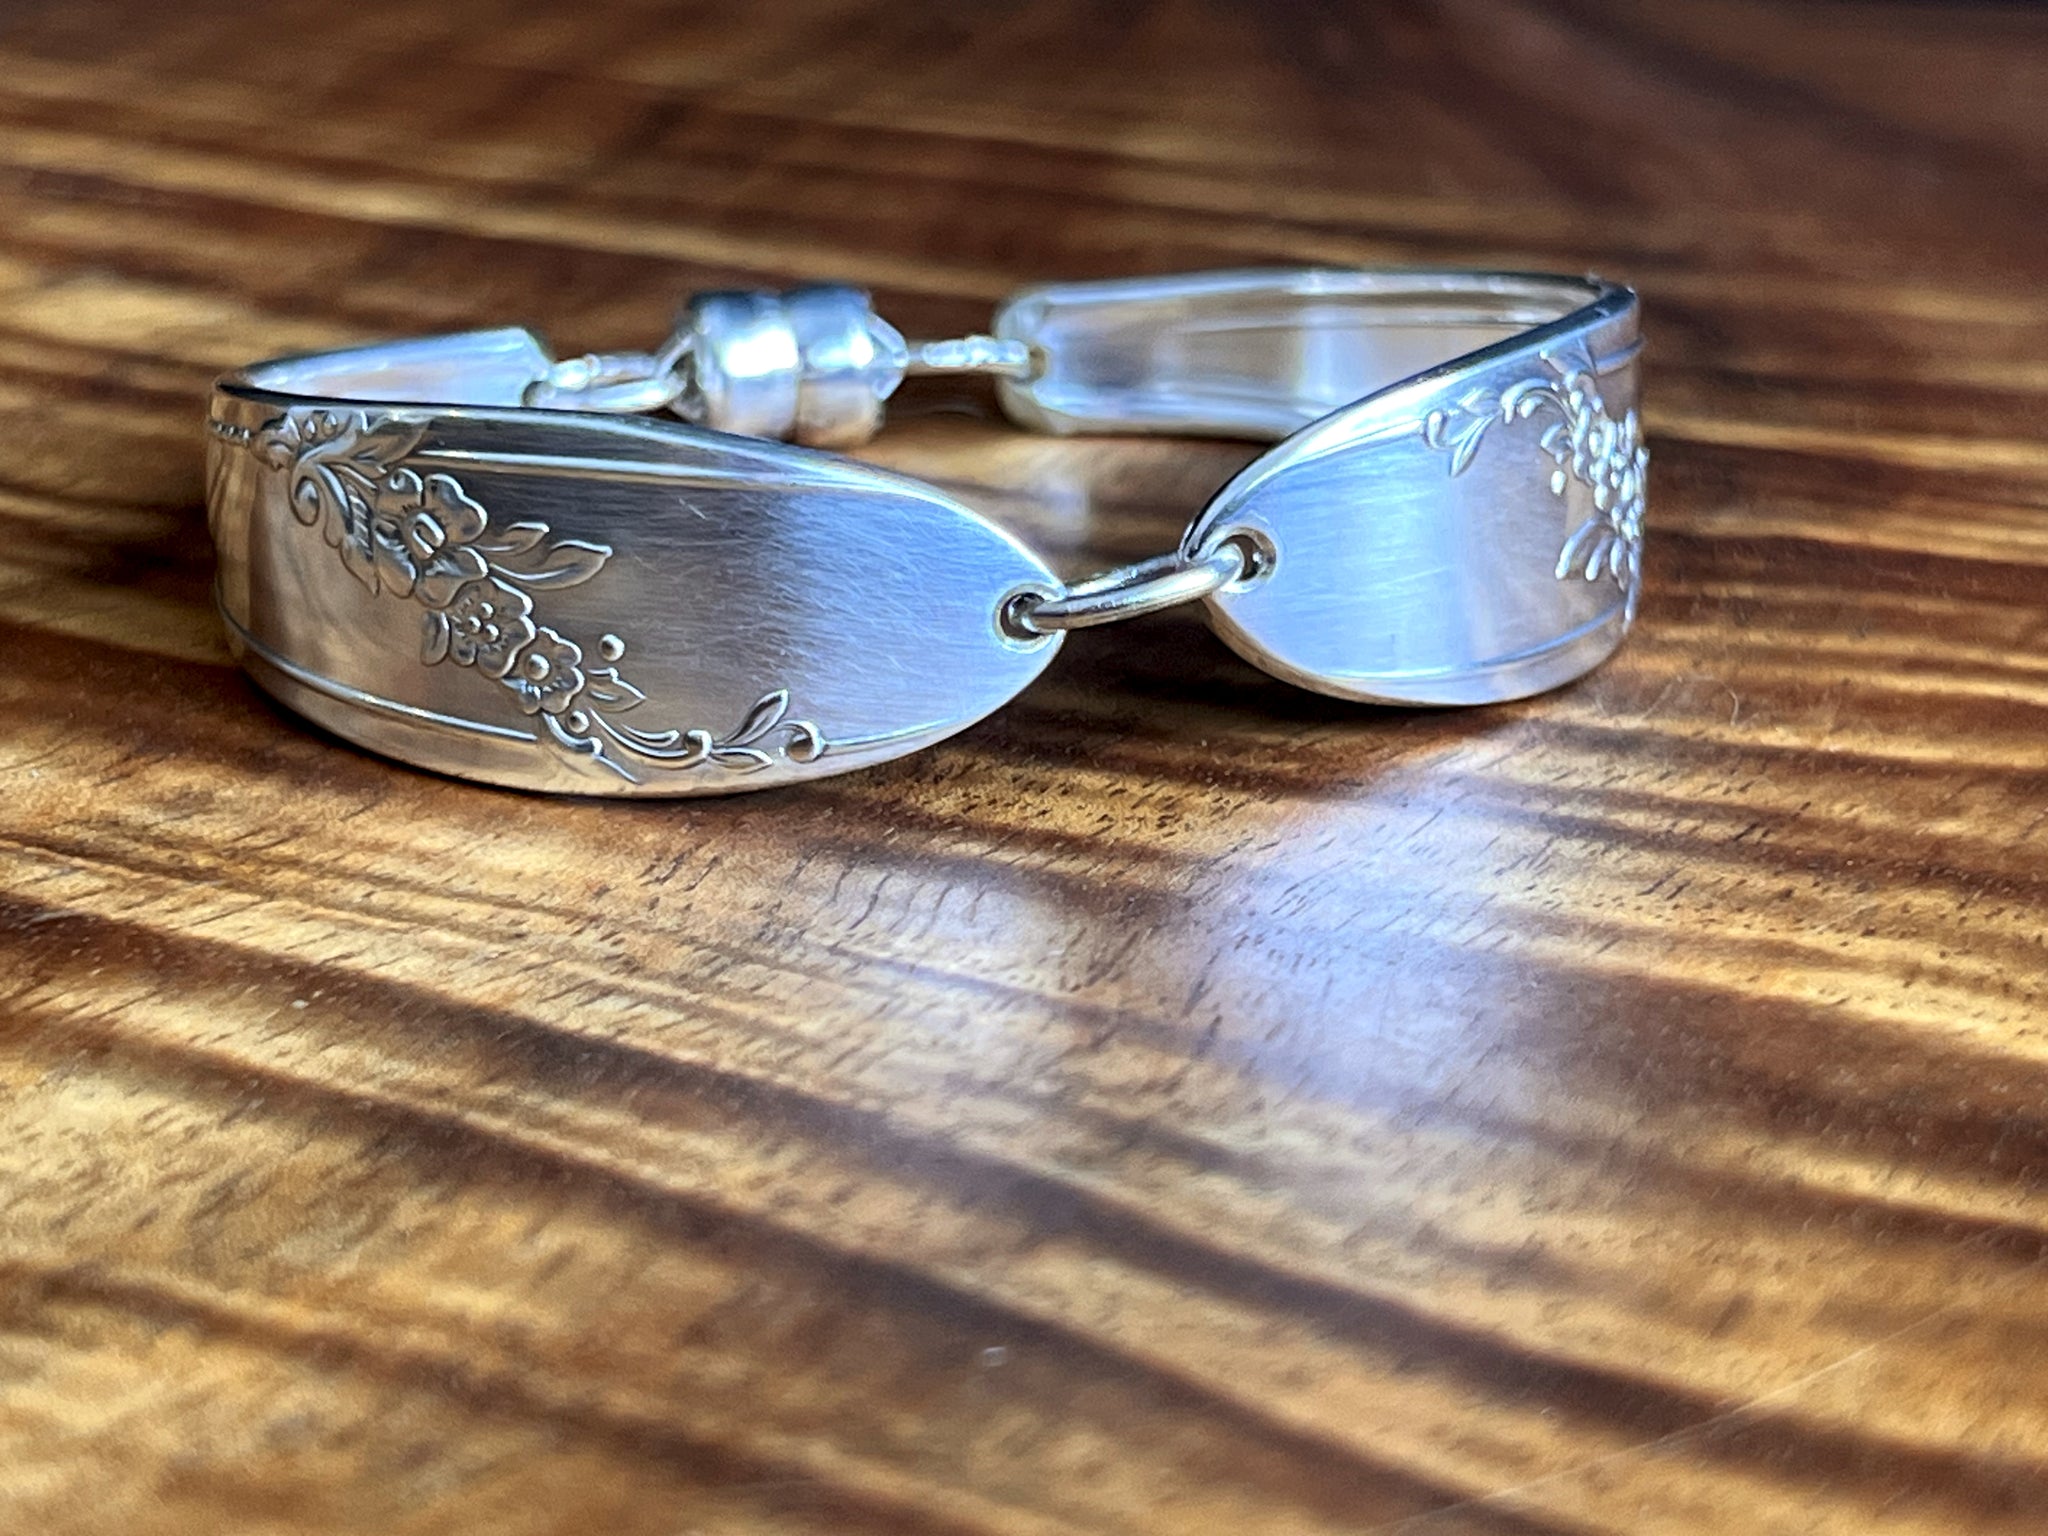 Bracelet handcrafted from antique spoon handles